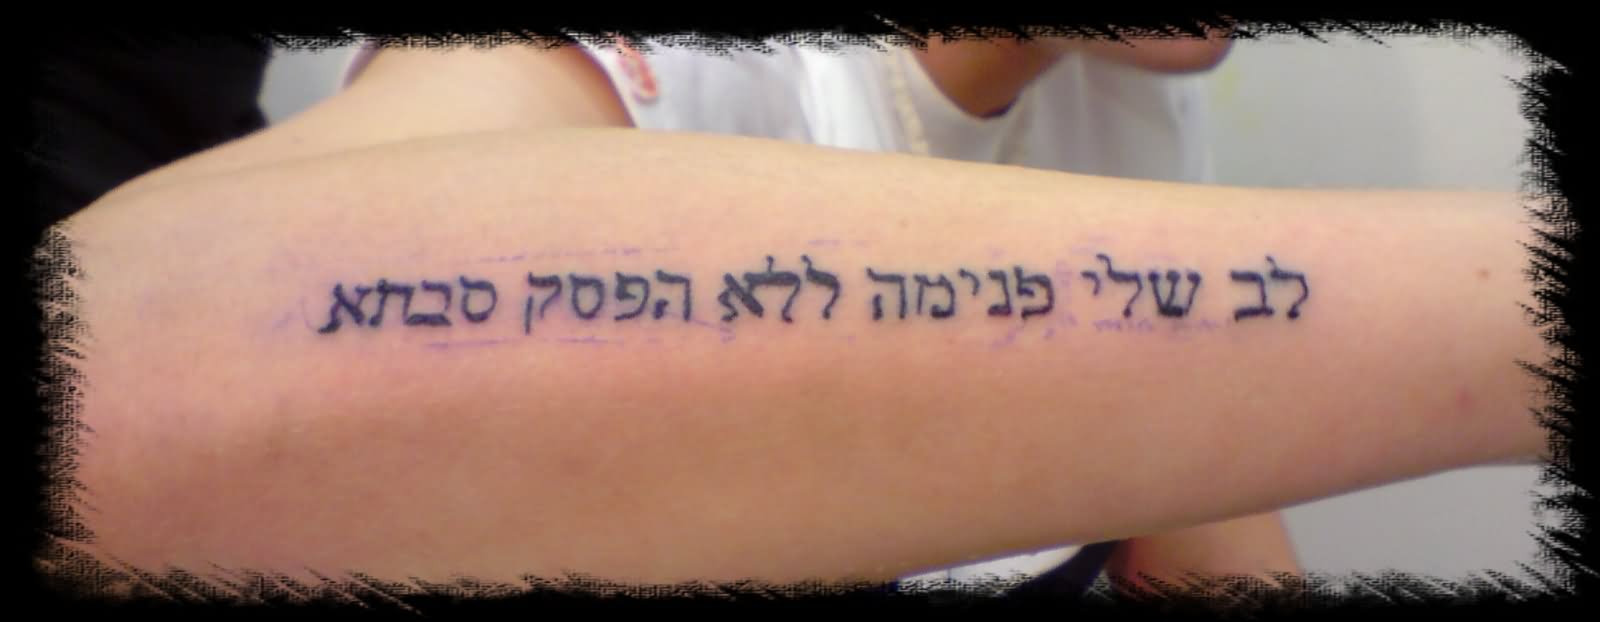 Black Hebrew lettering Tattoo On Right Arm